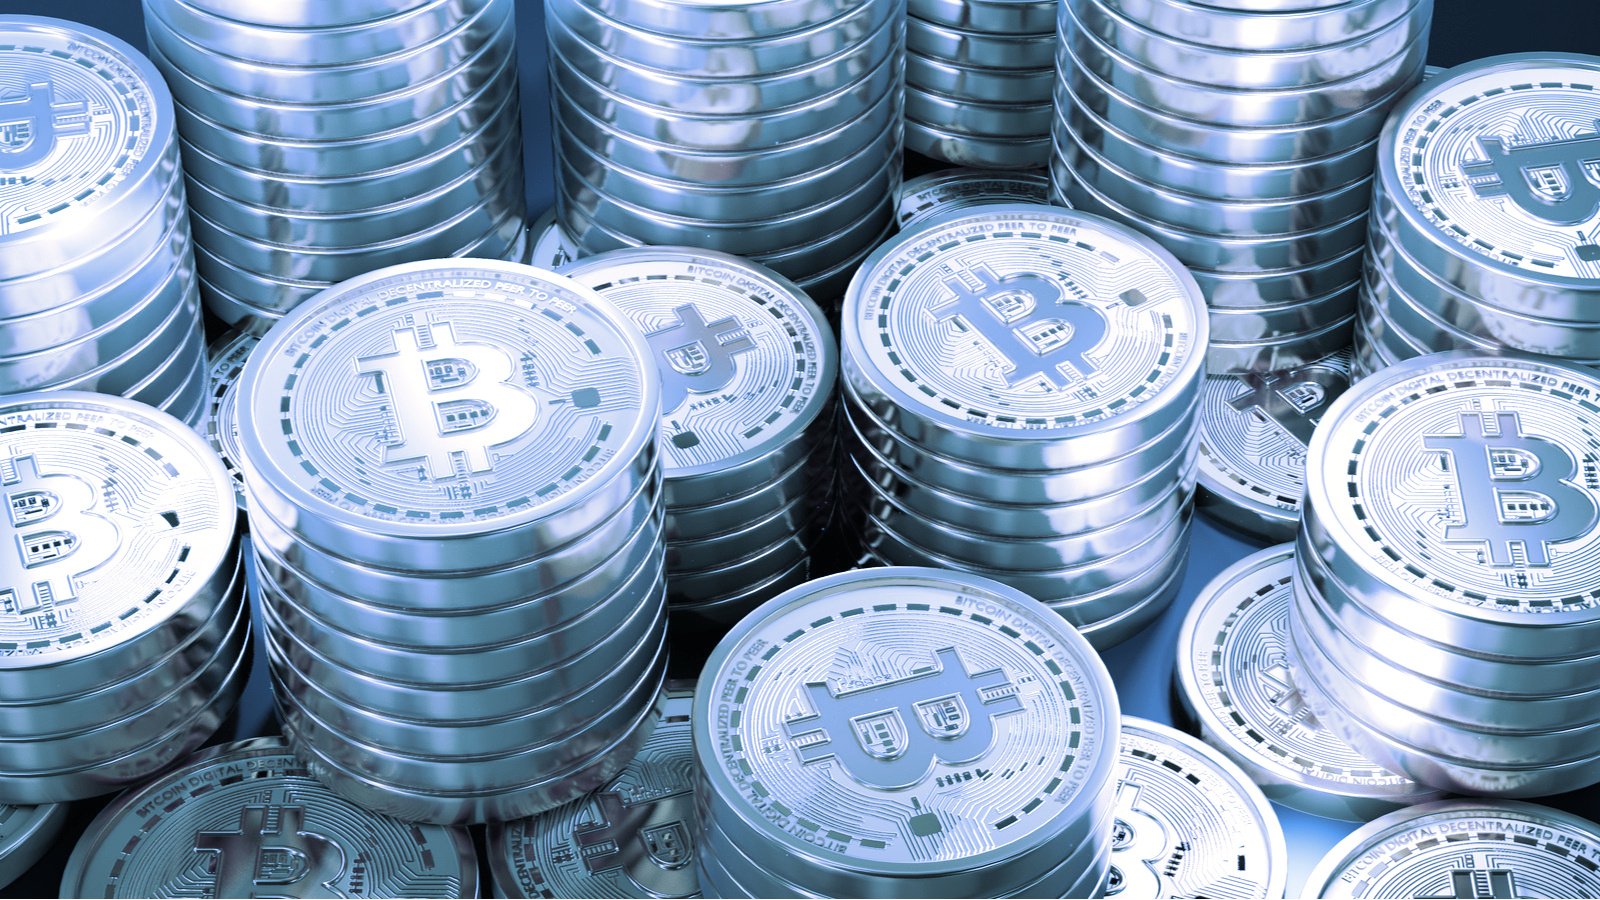 Institutional investors are increasingly interested in buying Bitcoin. Image: Shutterstock